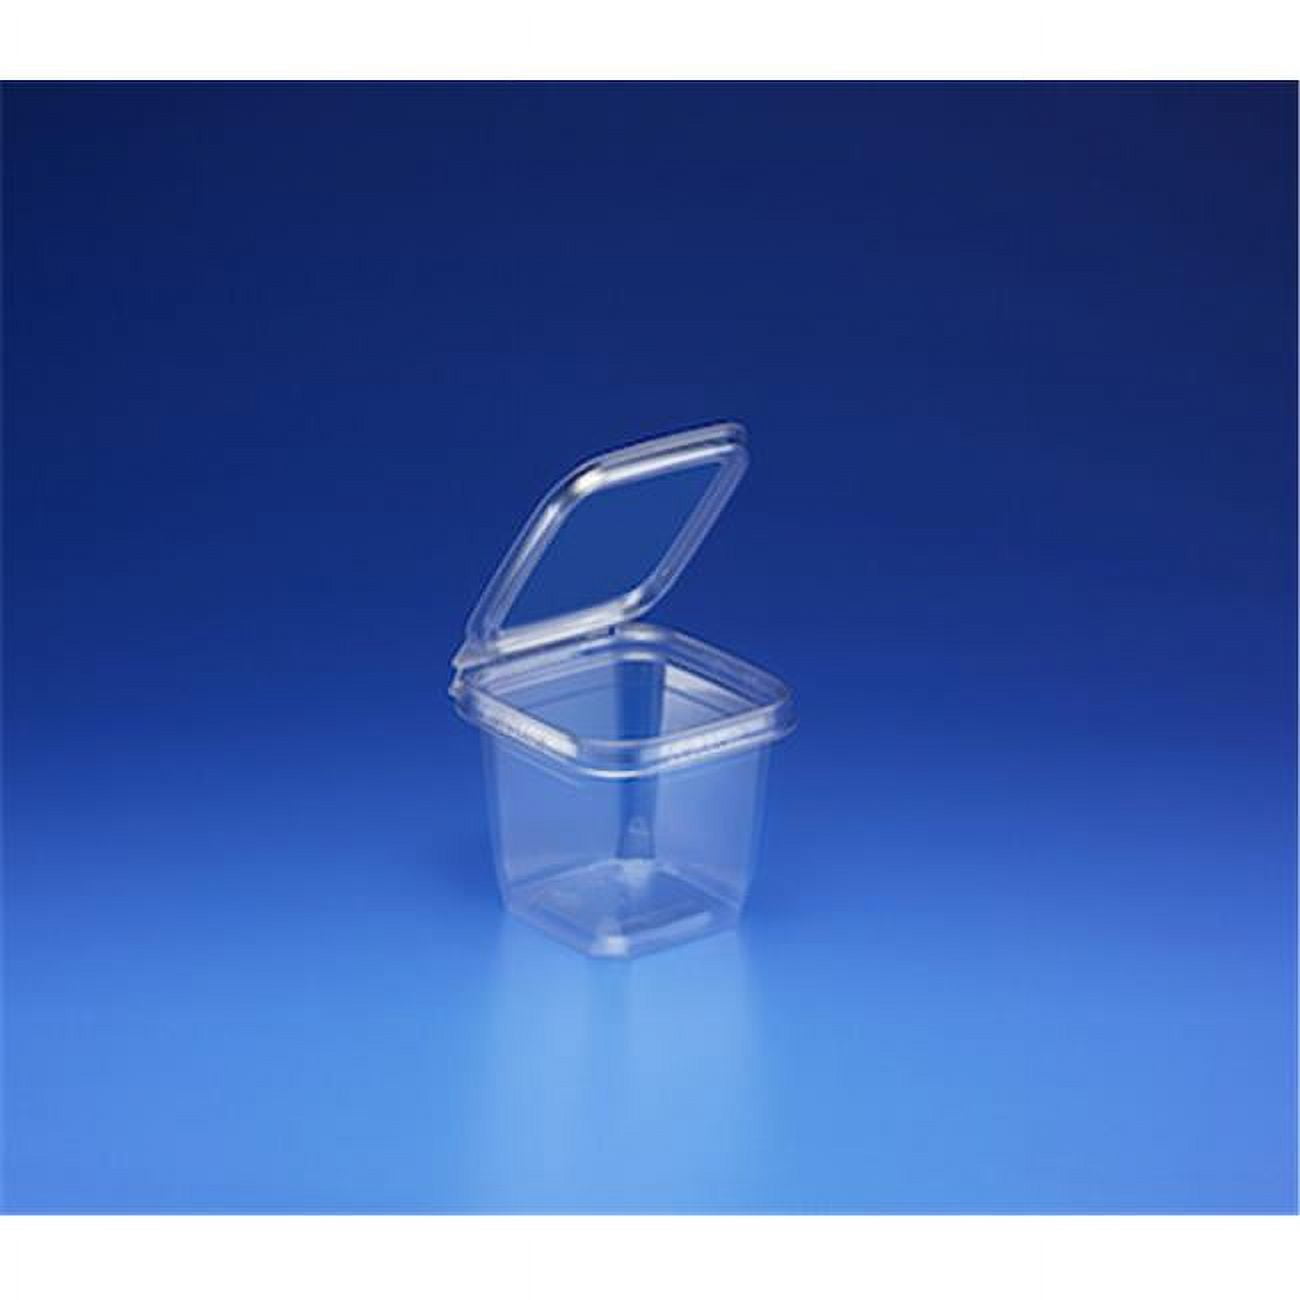 Ts4016 16 Oz Squareware Clamshell Pete Tamper Resistant, Clear - Case Of 276